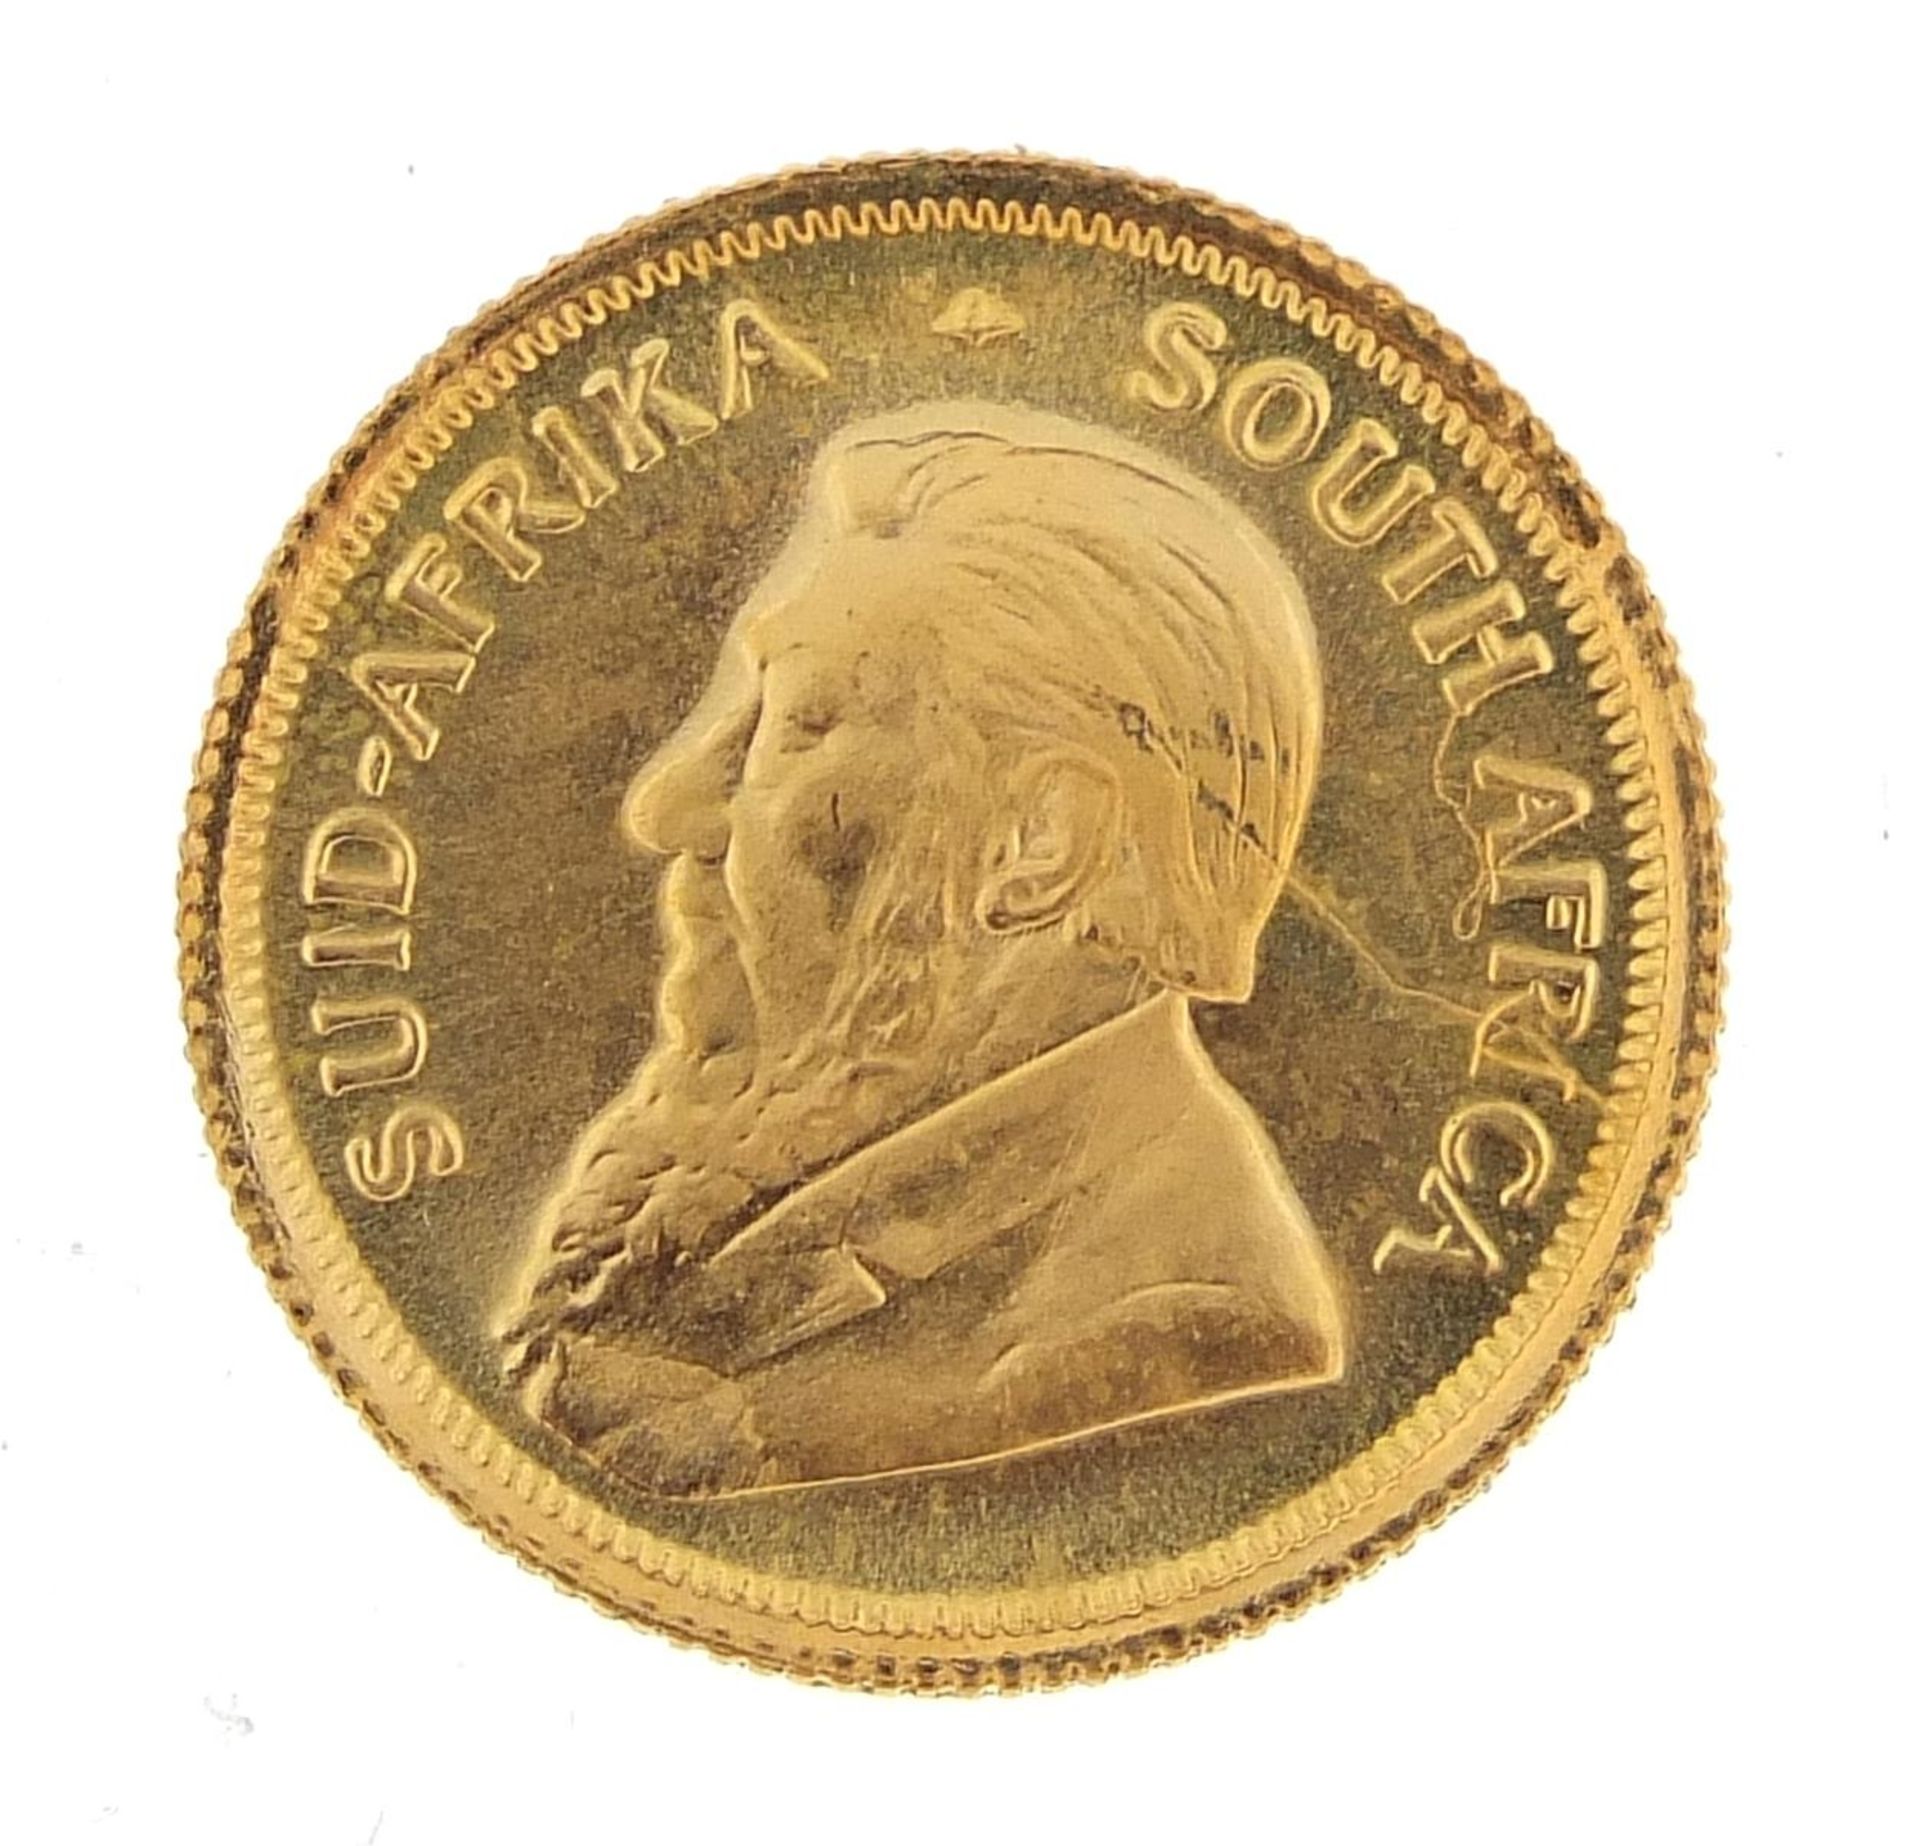 South African 1980 one tenth gold krugerrand - this lot is sold without buyer?s premium, the - Image 2 of 3